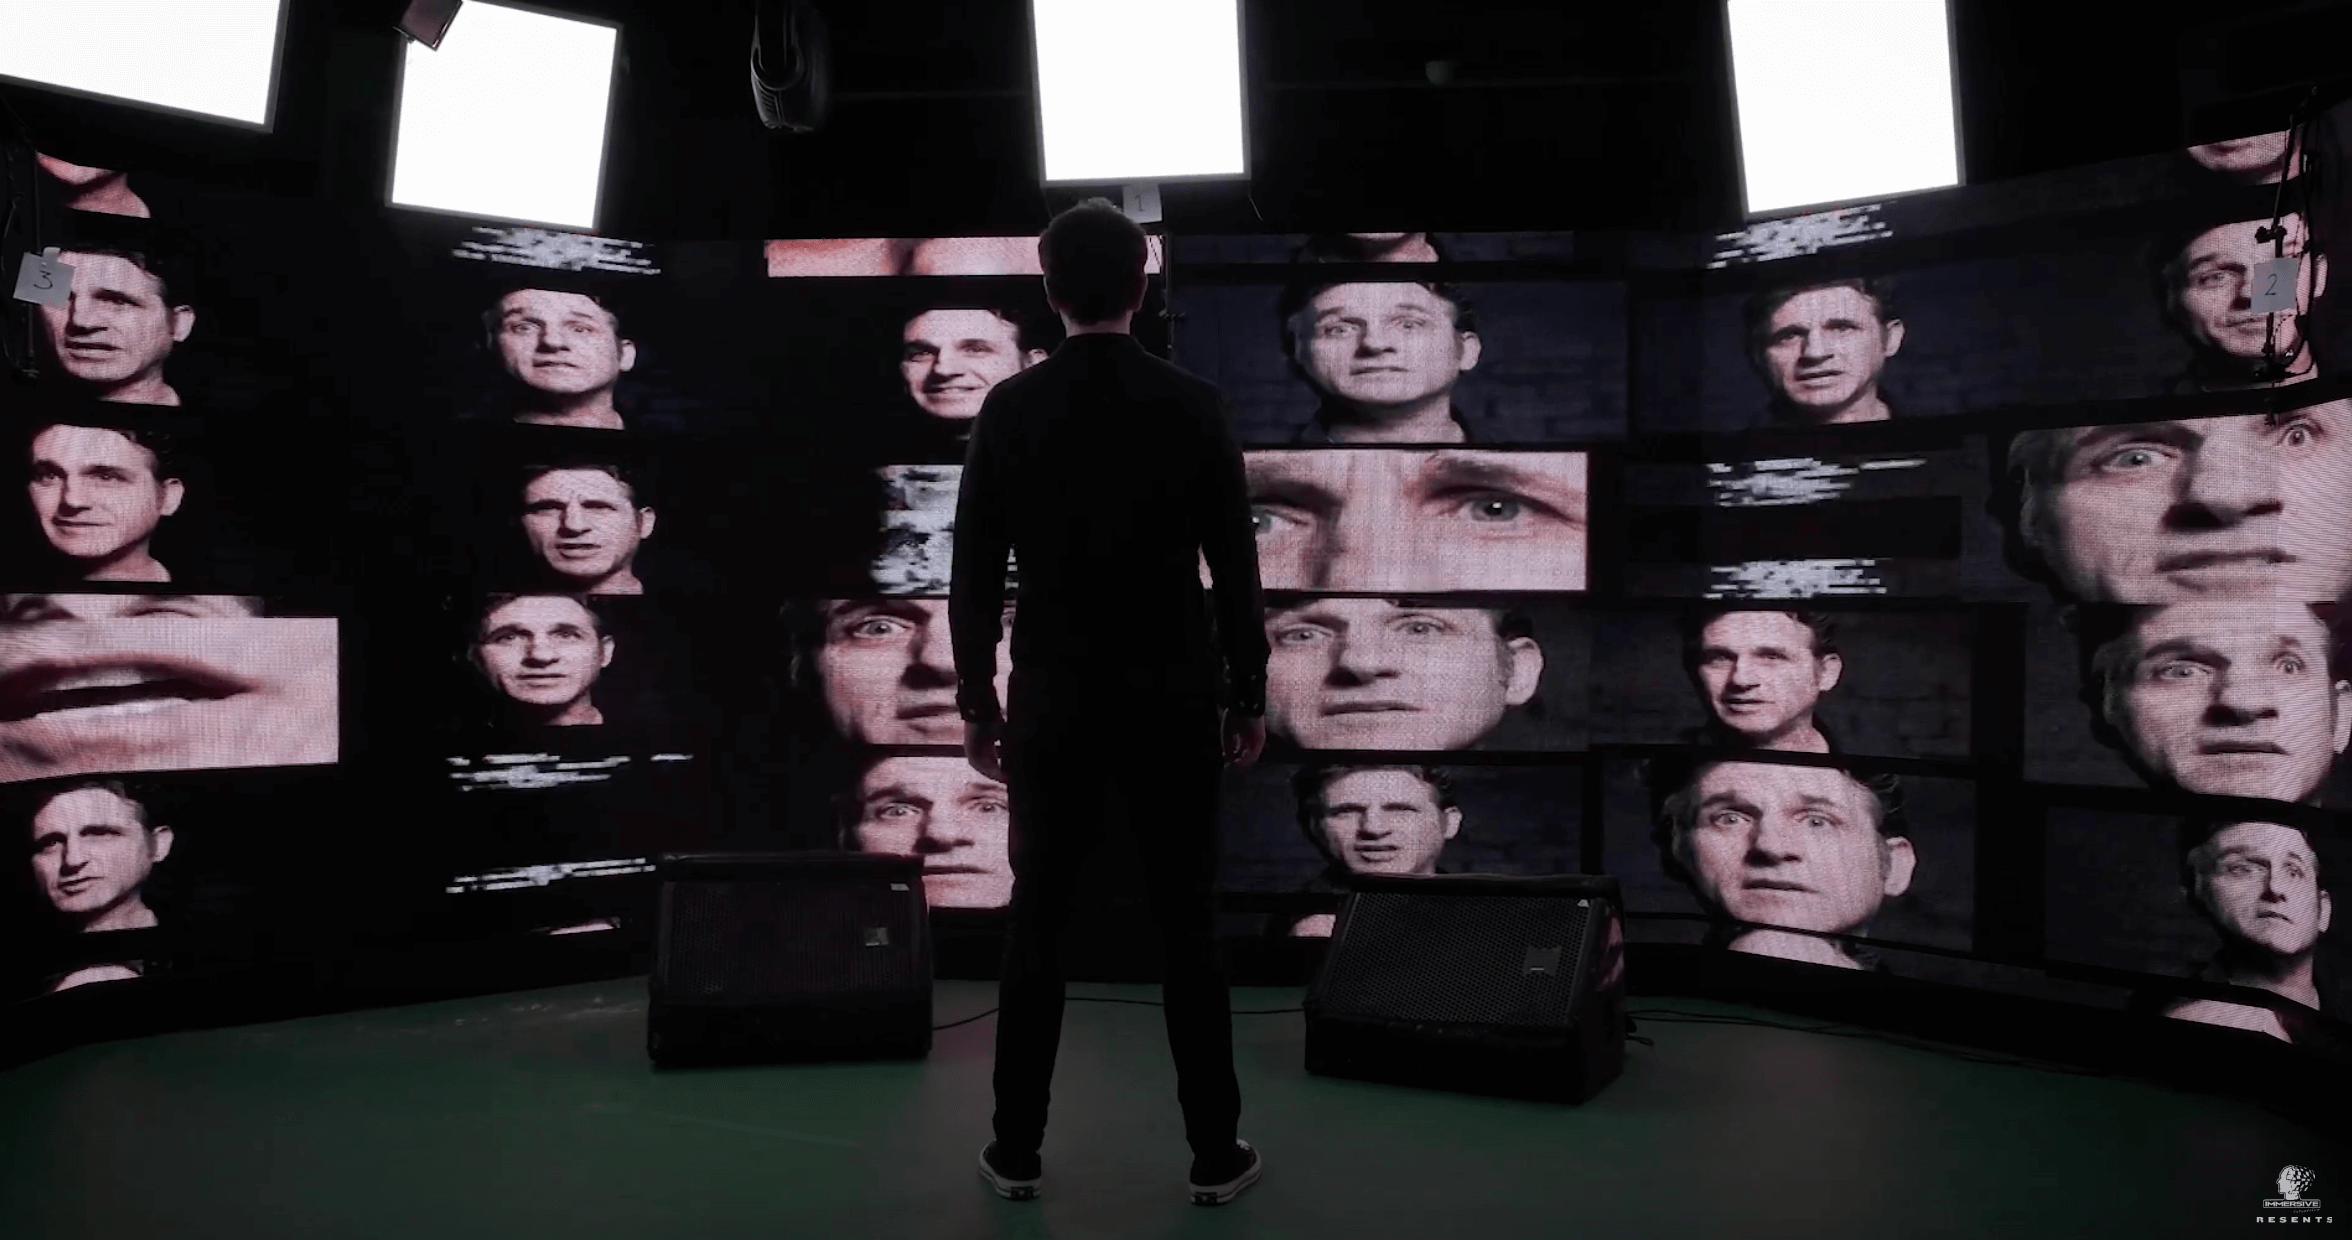 A man stares at a wall of various TV screens. They all have Tom Stade's face on them